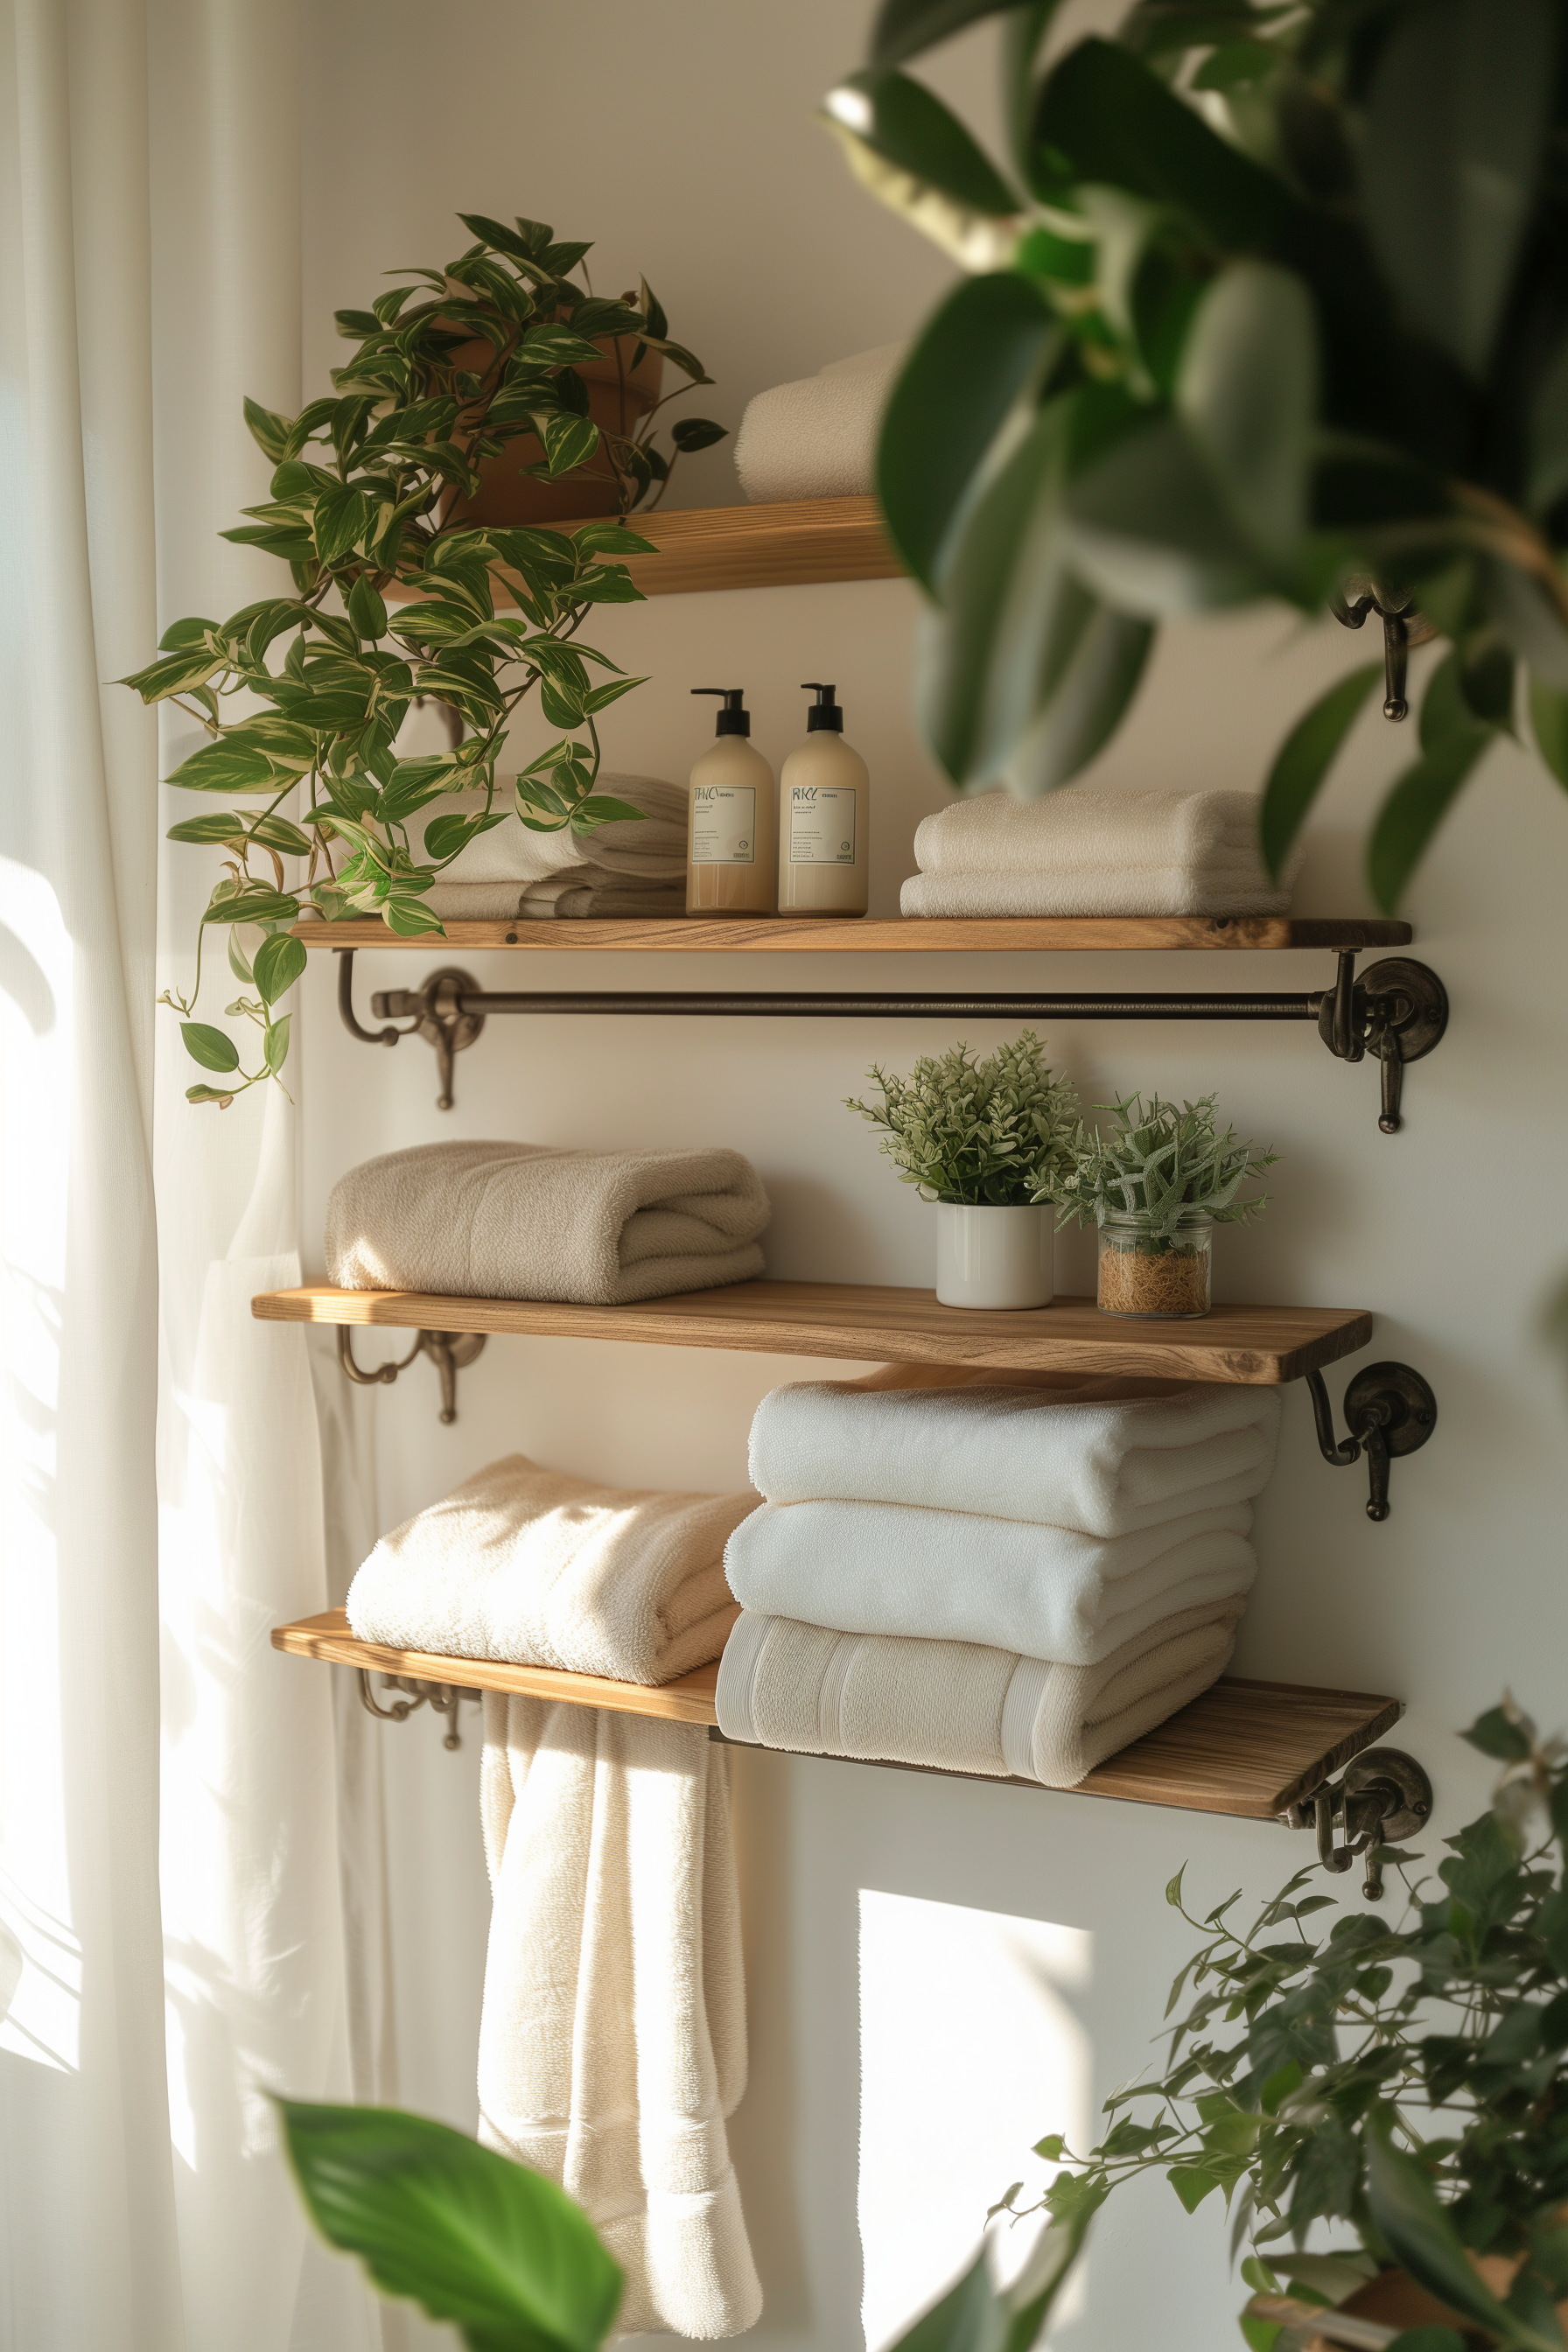 Bathroom shelving with iron pipes